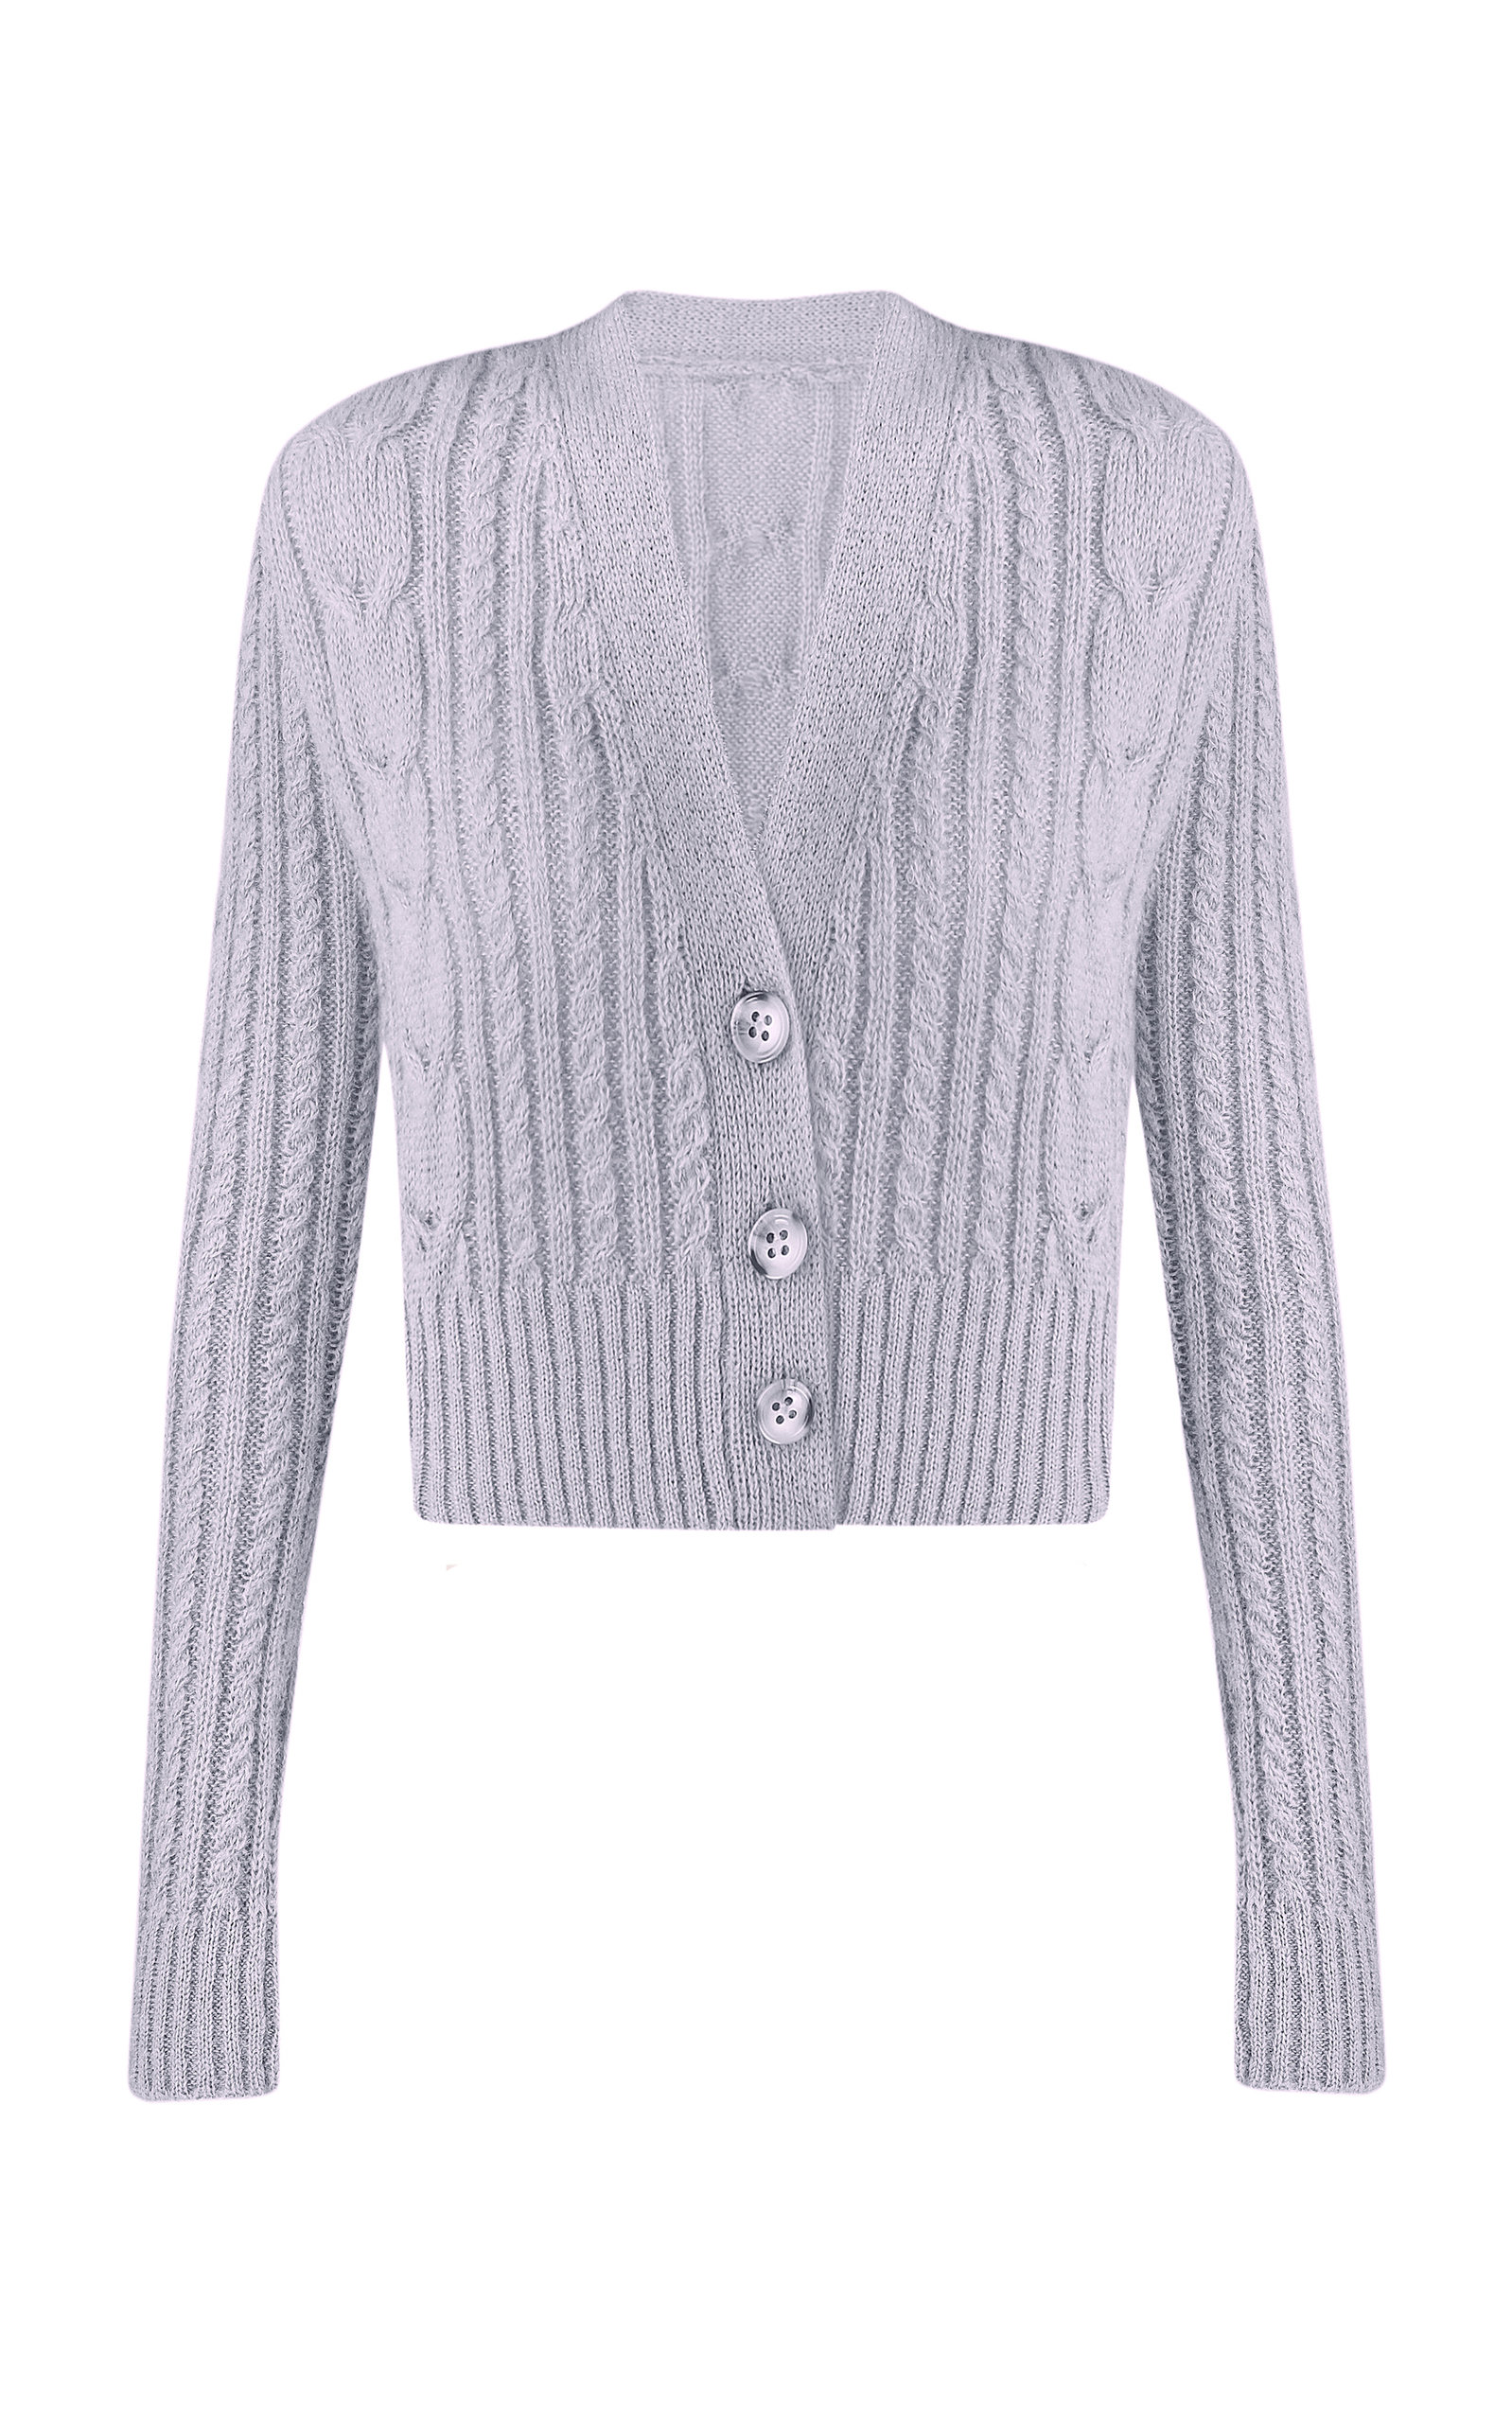 ANNA OCTOBER WOMEN'S TOMA CABLE-KNIT WOOL-BLEND CARDIGAN